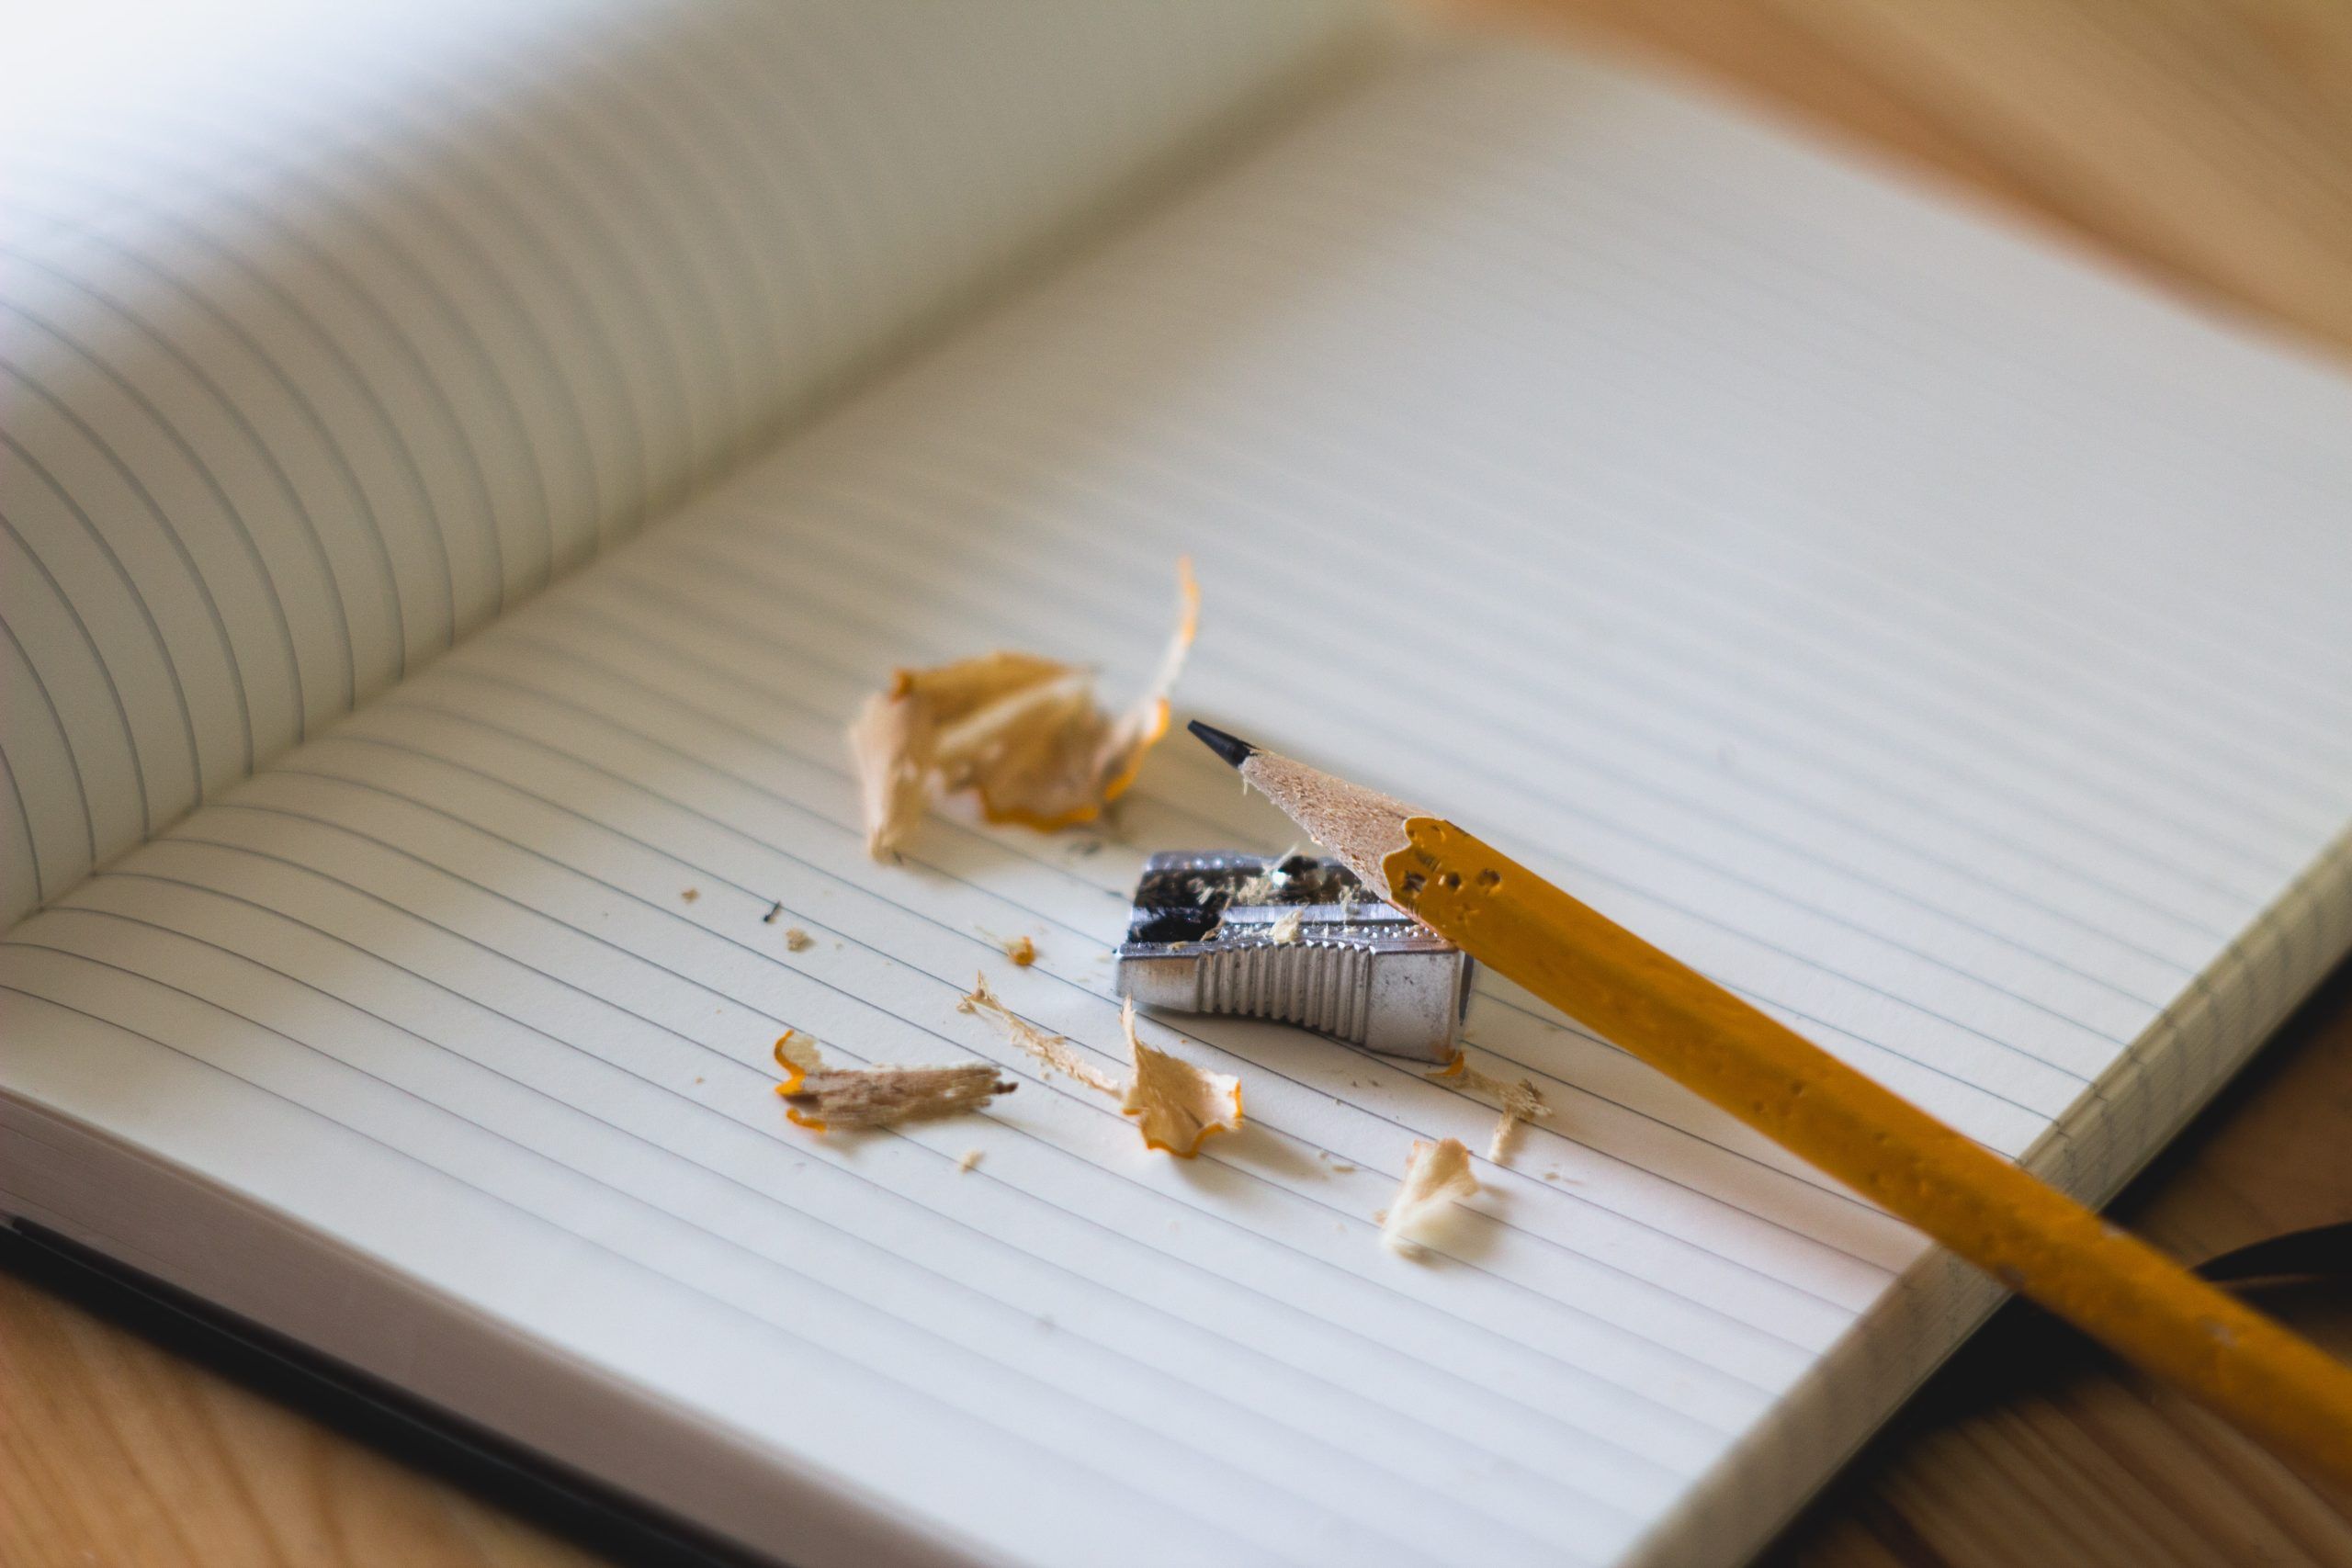 Image of a lined notebook with a pencil, pencil sharpener and pencil shavings